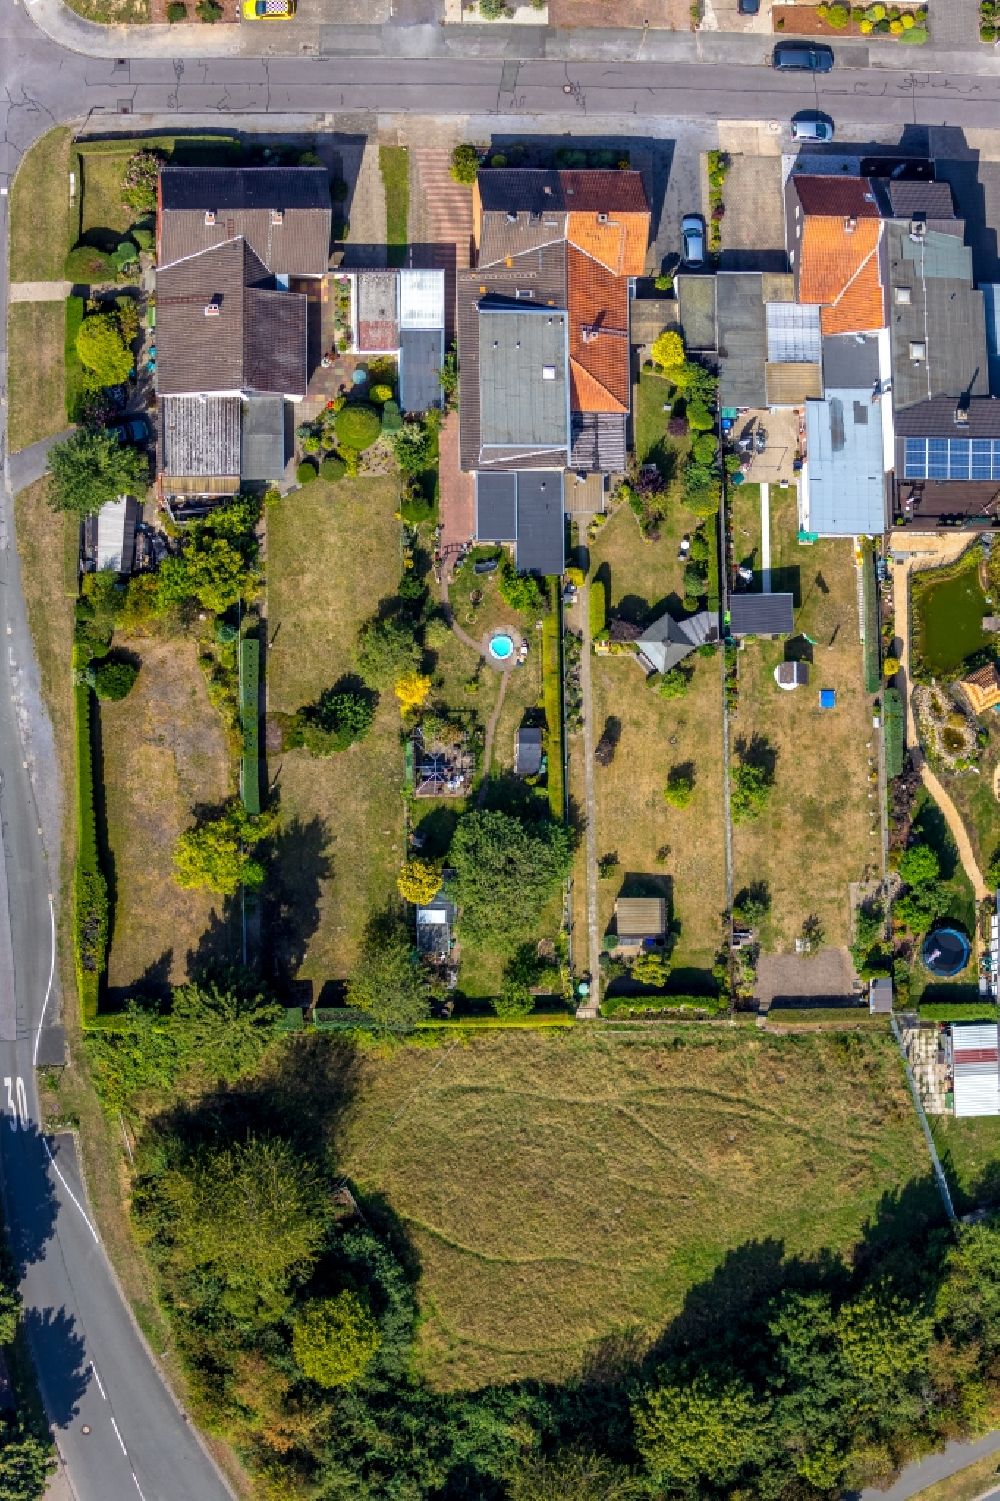 Hamm from the bird's eye view: Single-family residential area of settlement along the Mindener Weg in Hamm in the state North Rhine-Westphalia, Germany